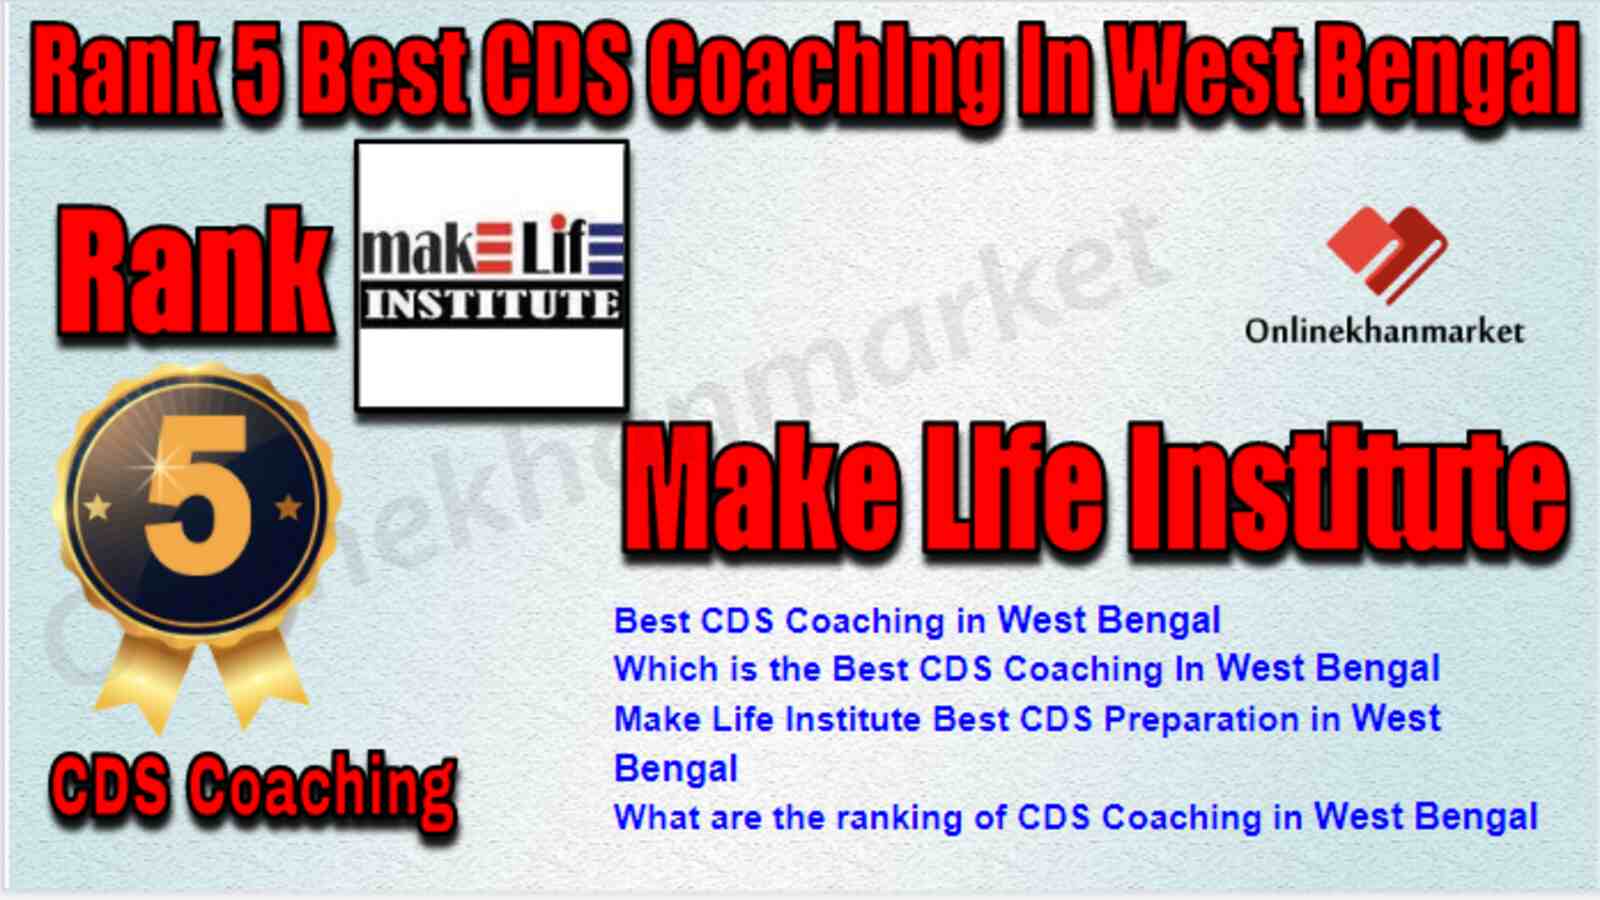 Rank 5 Best CDS Coaching in West Bengal